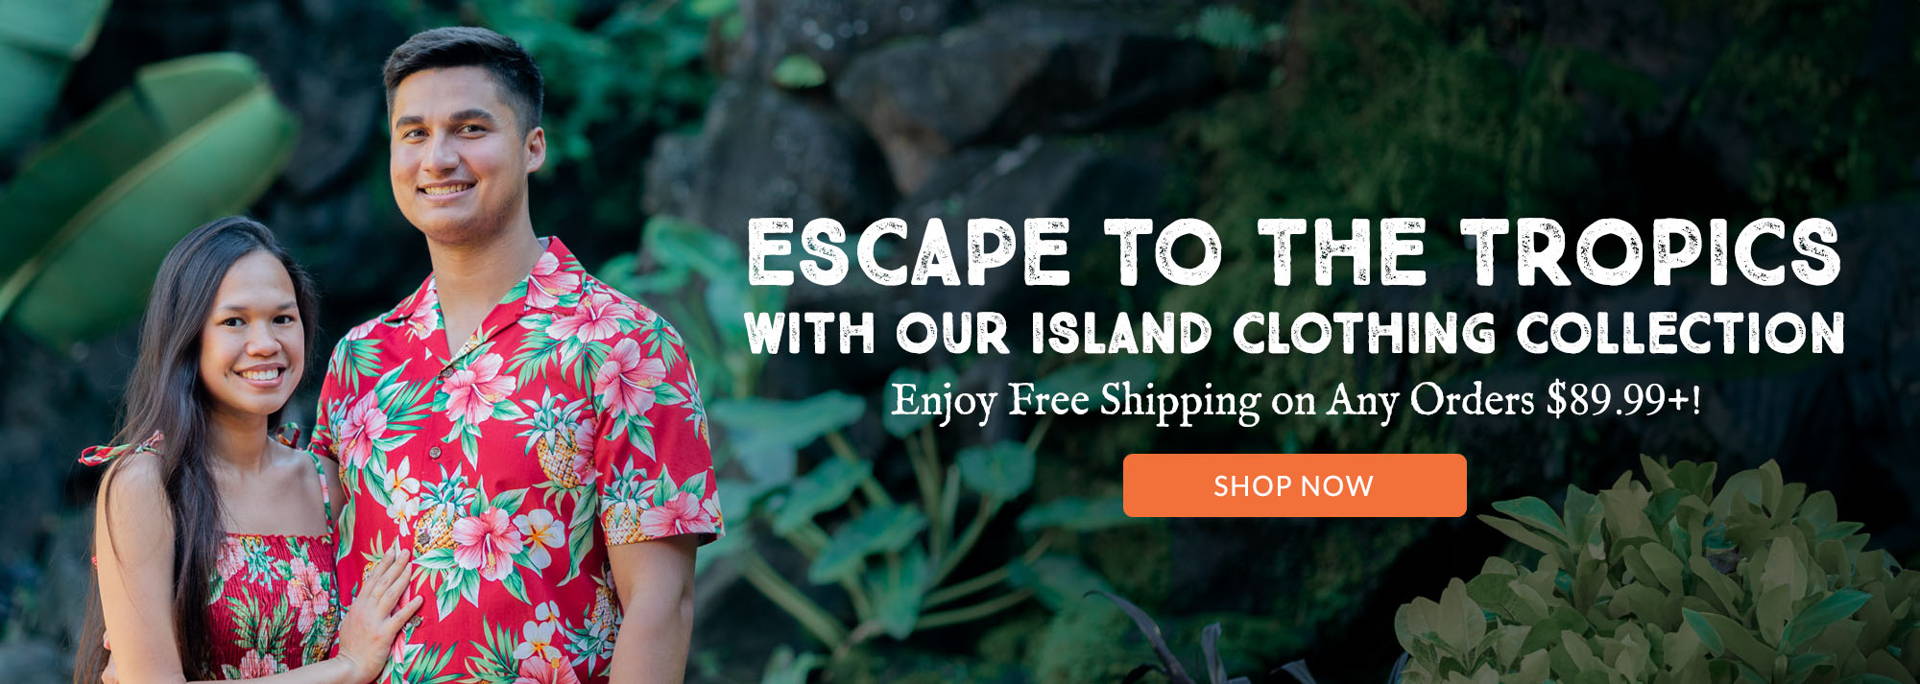 Escape to the tropics with our Island Clothing Collection! Free Shipping on Orders $89.99+